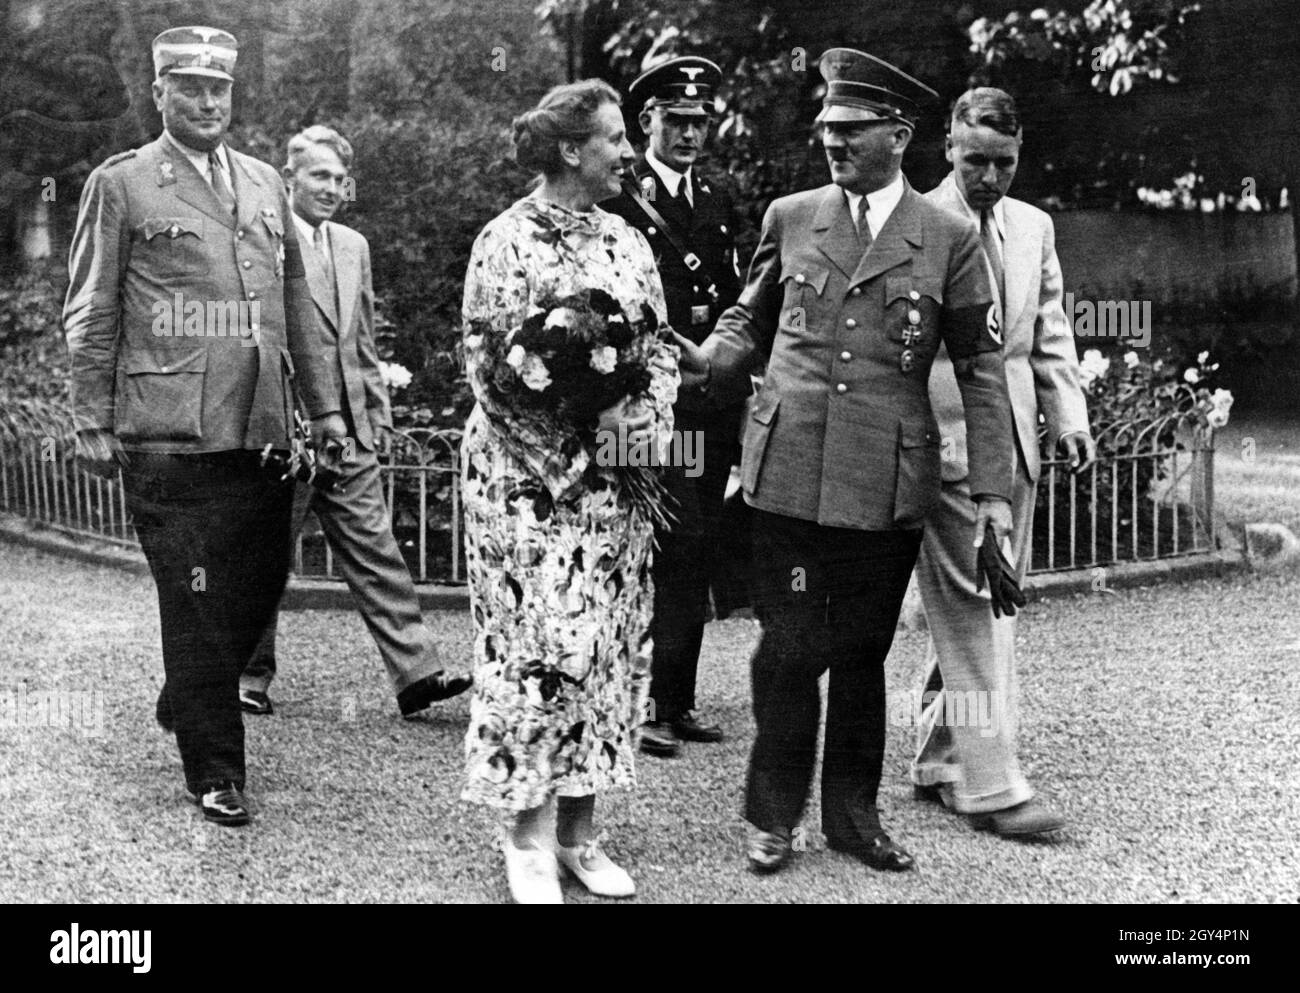 On the left are Wilhelm Brückner, Hitler's chief adjutant until that year, Winifred Wagner's son Wolfgang, the festival director Winifred Wagner, Richard Wagner's daughter-in-law, an SS man from Hitler's bodyguard (Führerbegleitkommando), Adolf Hitler and Richard Wagner's eldest son and grandson Wieland. Wolfgang later withdrew his mother's right to attend the festival when he was the director himself, after she repeatedly showed herself to be an old Nazi. Even without a year, this picture would easily date to 1940, as Hitler wore tails at the festival until that year. With the start of the Stock Photo